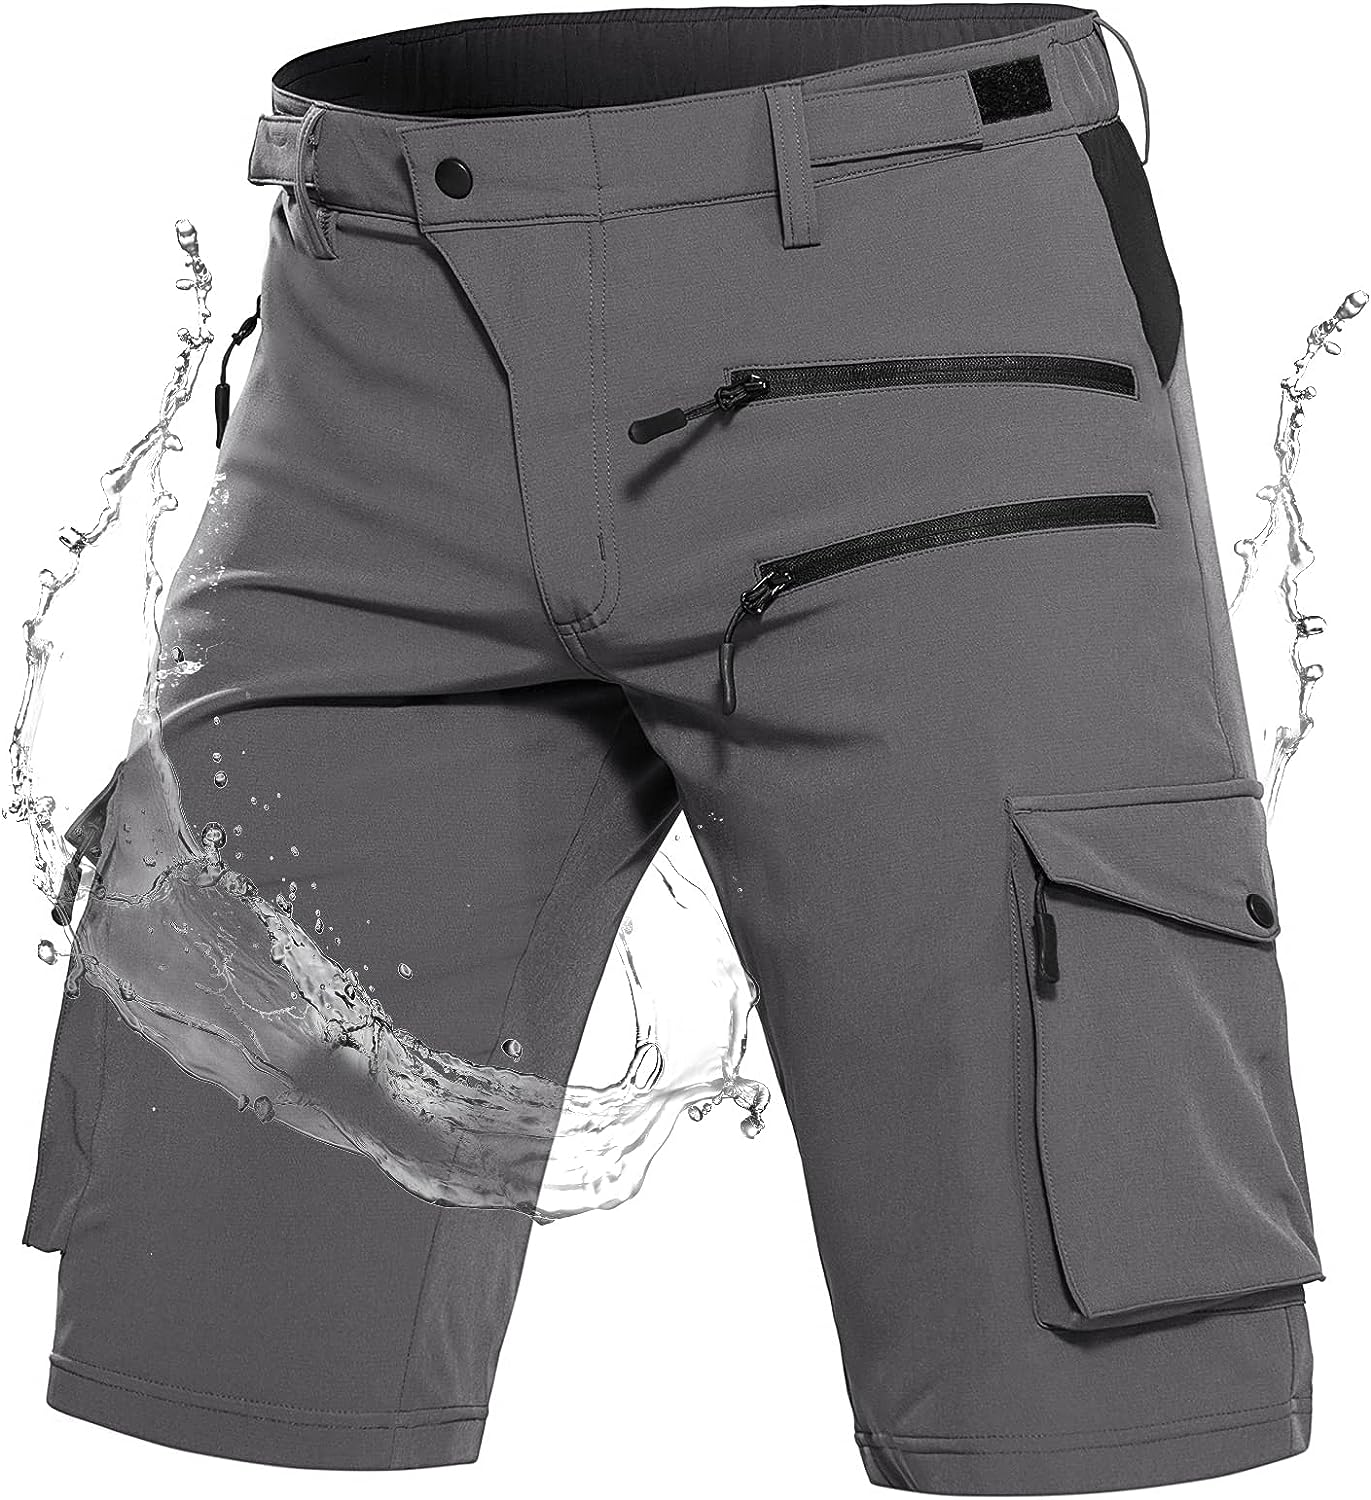 Men's Hiking Shorts Tactical Shorts Lightweight Quick-Dry Outdoor Cargo Casual Shorts for Hiking Cycling